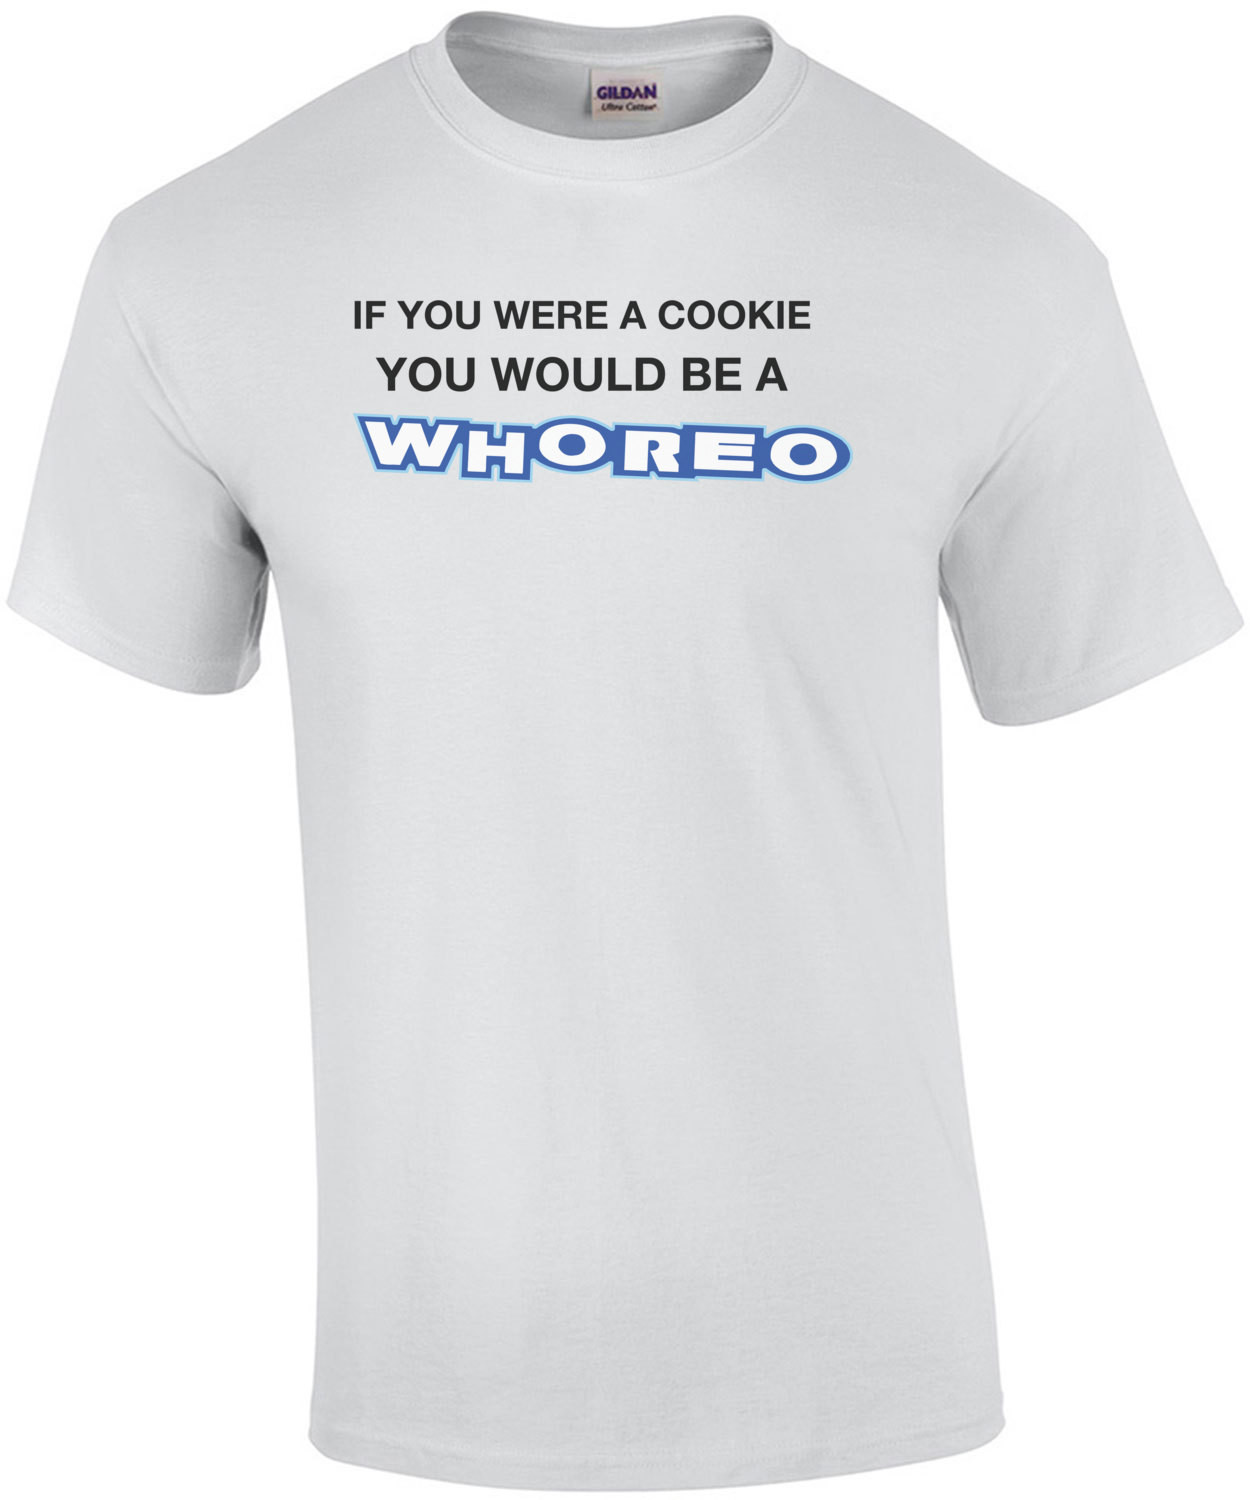 If You Were a Cookie You Would Be a Whoreo T-Shirt